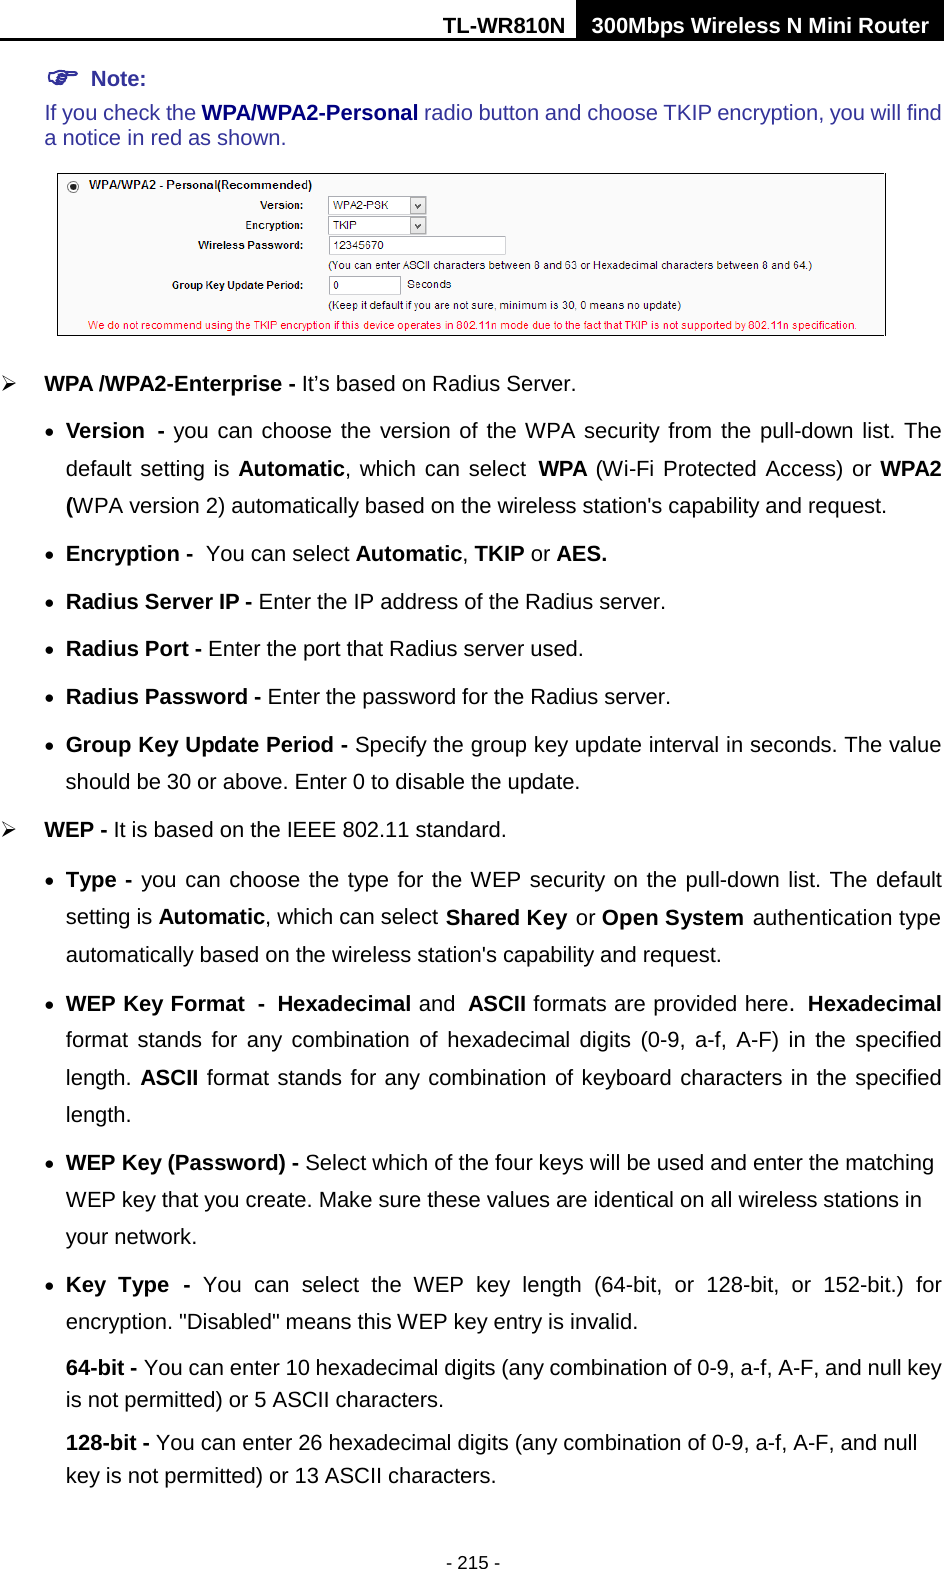 TL-WR810N 300Mbps Wireless N Mini Router  - 215 -  Note:   If you check the WPA/WPA2-Personal radio button and choose TKIP encryption, you will find a notice in red as shown.   WPA /WPA2-Enterprise - It’s based on Radius Server. • Version - you can choose the version of the WPA security from the pull-down list. The default setting is Automatic, which can select WPA (Wi-Fi Protected Access) or WPA2 (WPA version 2) automatically based on the wireless station&apos;s capability and request. • Encryption - You can select Automatic, TKIP or AES. • Radius Server IP - Enter the IP address of the Radius server. • Radius Port - Enter the port that Radius server used. • Radius Password - Enter the password for the Radius server. • Group Key Update Period - Specify the group key update interval in seconds. The value should be 30 or above. Enter 0 to disable the update.  WEP - It is based on the IEEE 802.11 standard.   • Type - you can choose the type for the WEP security on the pull-down list. The default setting is Automatic, which can select Shared Key or Open System authentication type automatically based on the wireless station&apos;s capability and request. • WEP Key Format - Hexadecimal and ASCII formats are provided here. Hexadecimal format stands for any combination of hexadecimal digits (0-9, a-f, A-F) in the specified length. ASCII format stands for any combination of keyboard characters in the specified length.   • WEP Key (Password) - Select which of the four keys will be used and enter the matching WEP key that you create. Make sure these values are identical on all wireless stations in your network.   • Key Type - You can select the WEP key length (64-bit, or 128-bit, or 152-bit.) for encryption. &quot;Disabled&quot; means this WEP key entry is invalid. 64-bit - You can enter 10 hexadecimal digits (any combination of 0-9, a-f, A-F, and null key is not permitted) or 5 ASCII characters.   128-bit - You can enter 26 hexadecimal digits (any combination of 0-9, a-f, A-F, and null key is not permitted) or 13 ASCII characters.   